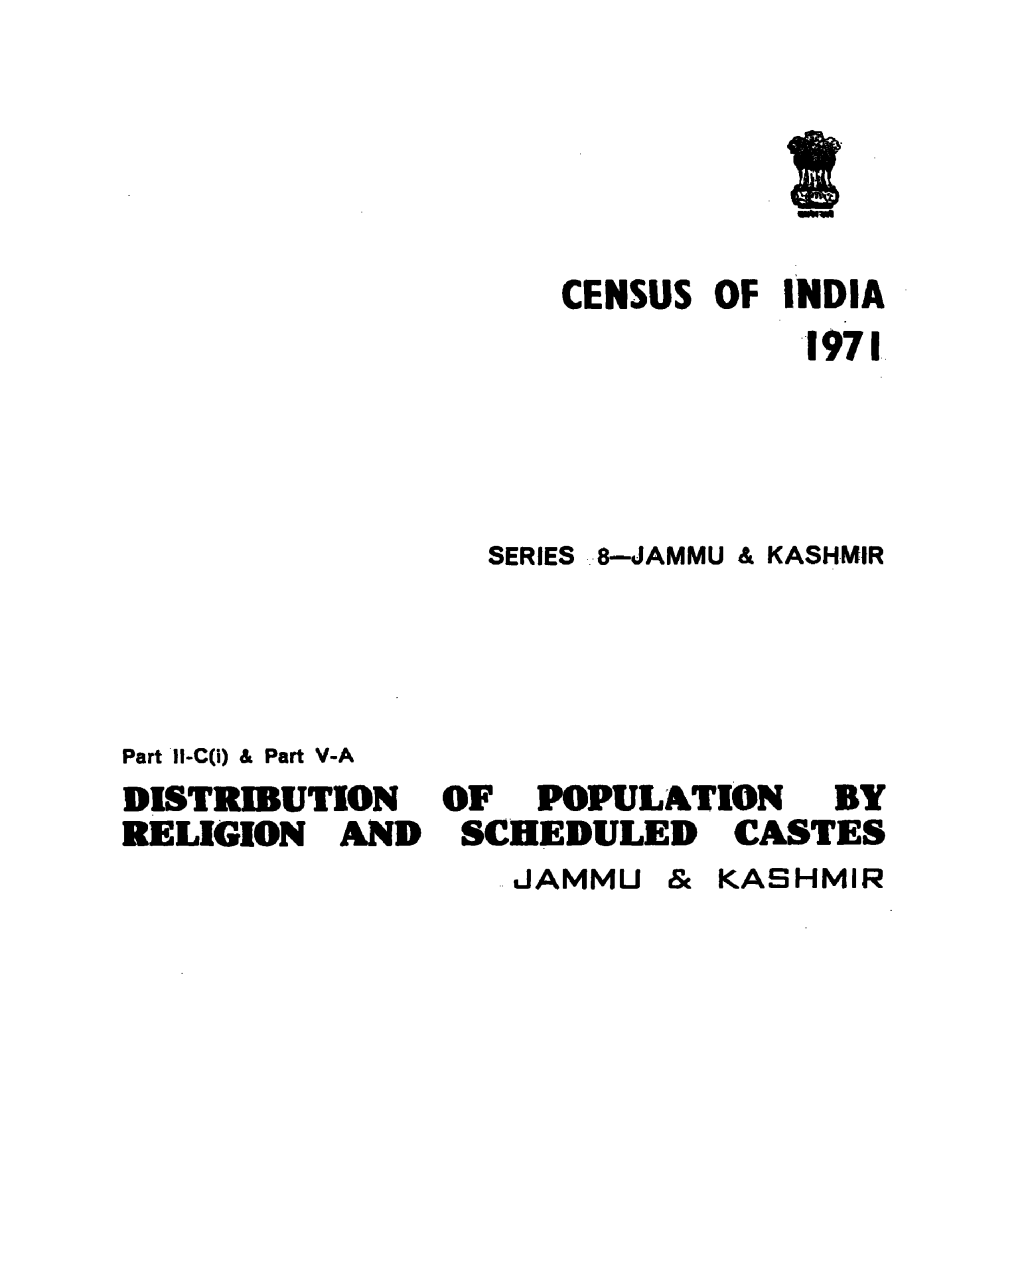 Distribution of Population by Religion and Scheduled Castes